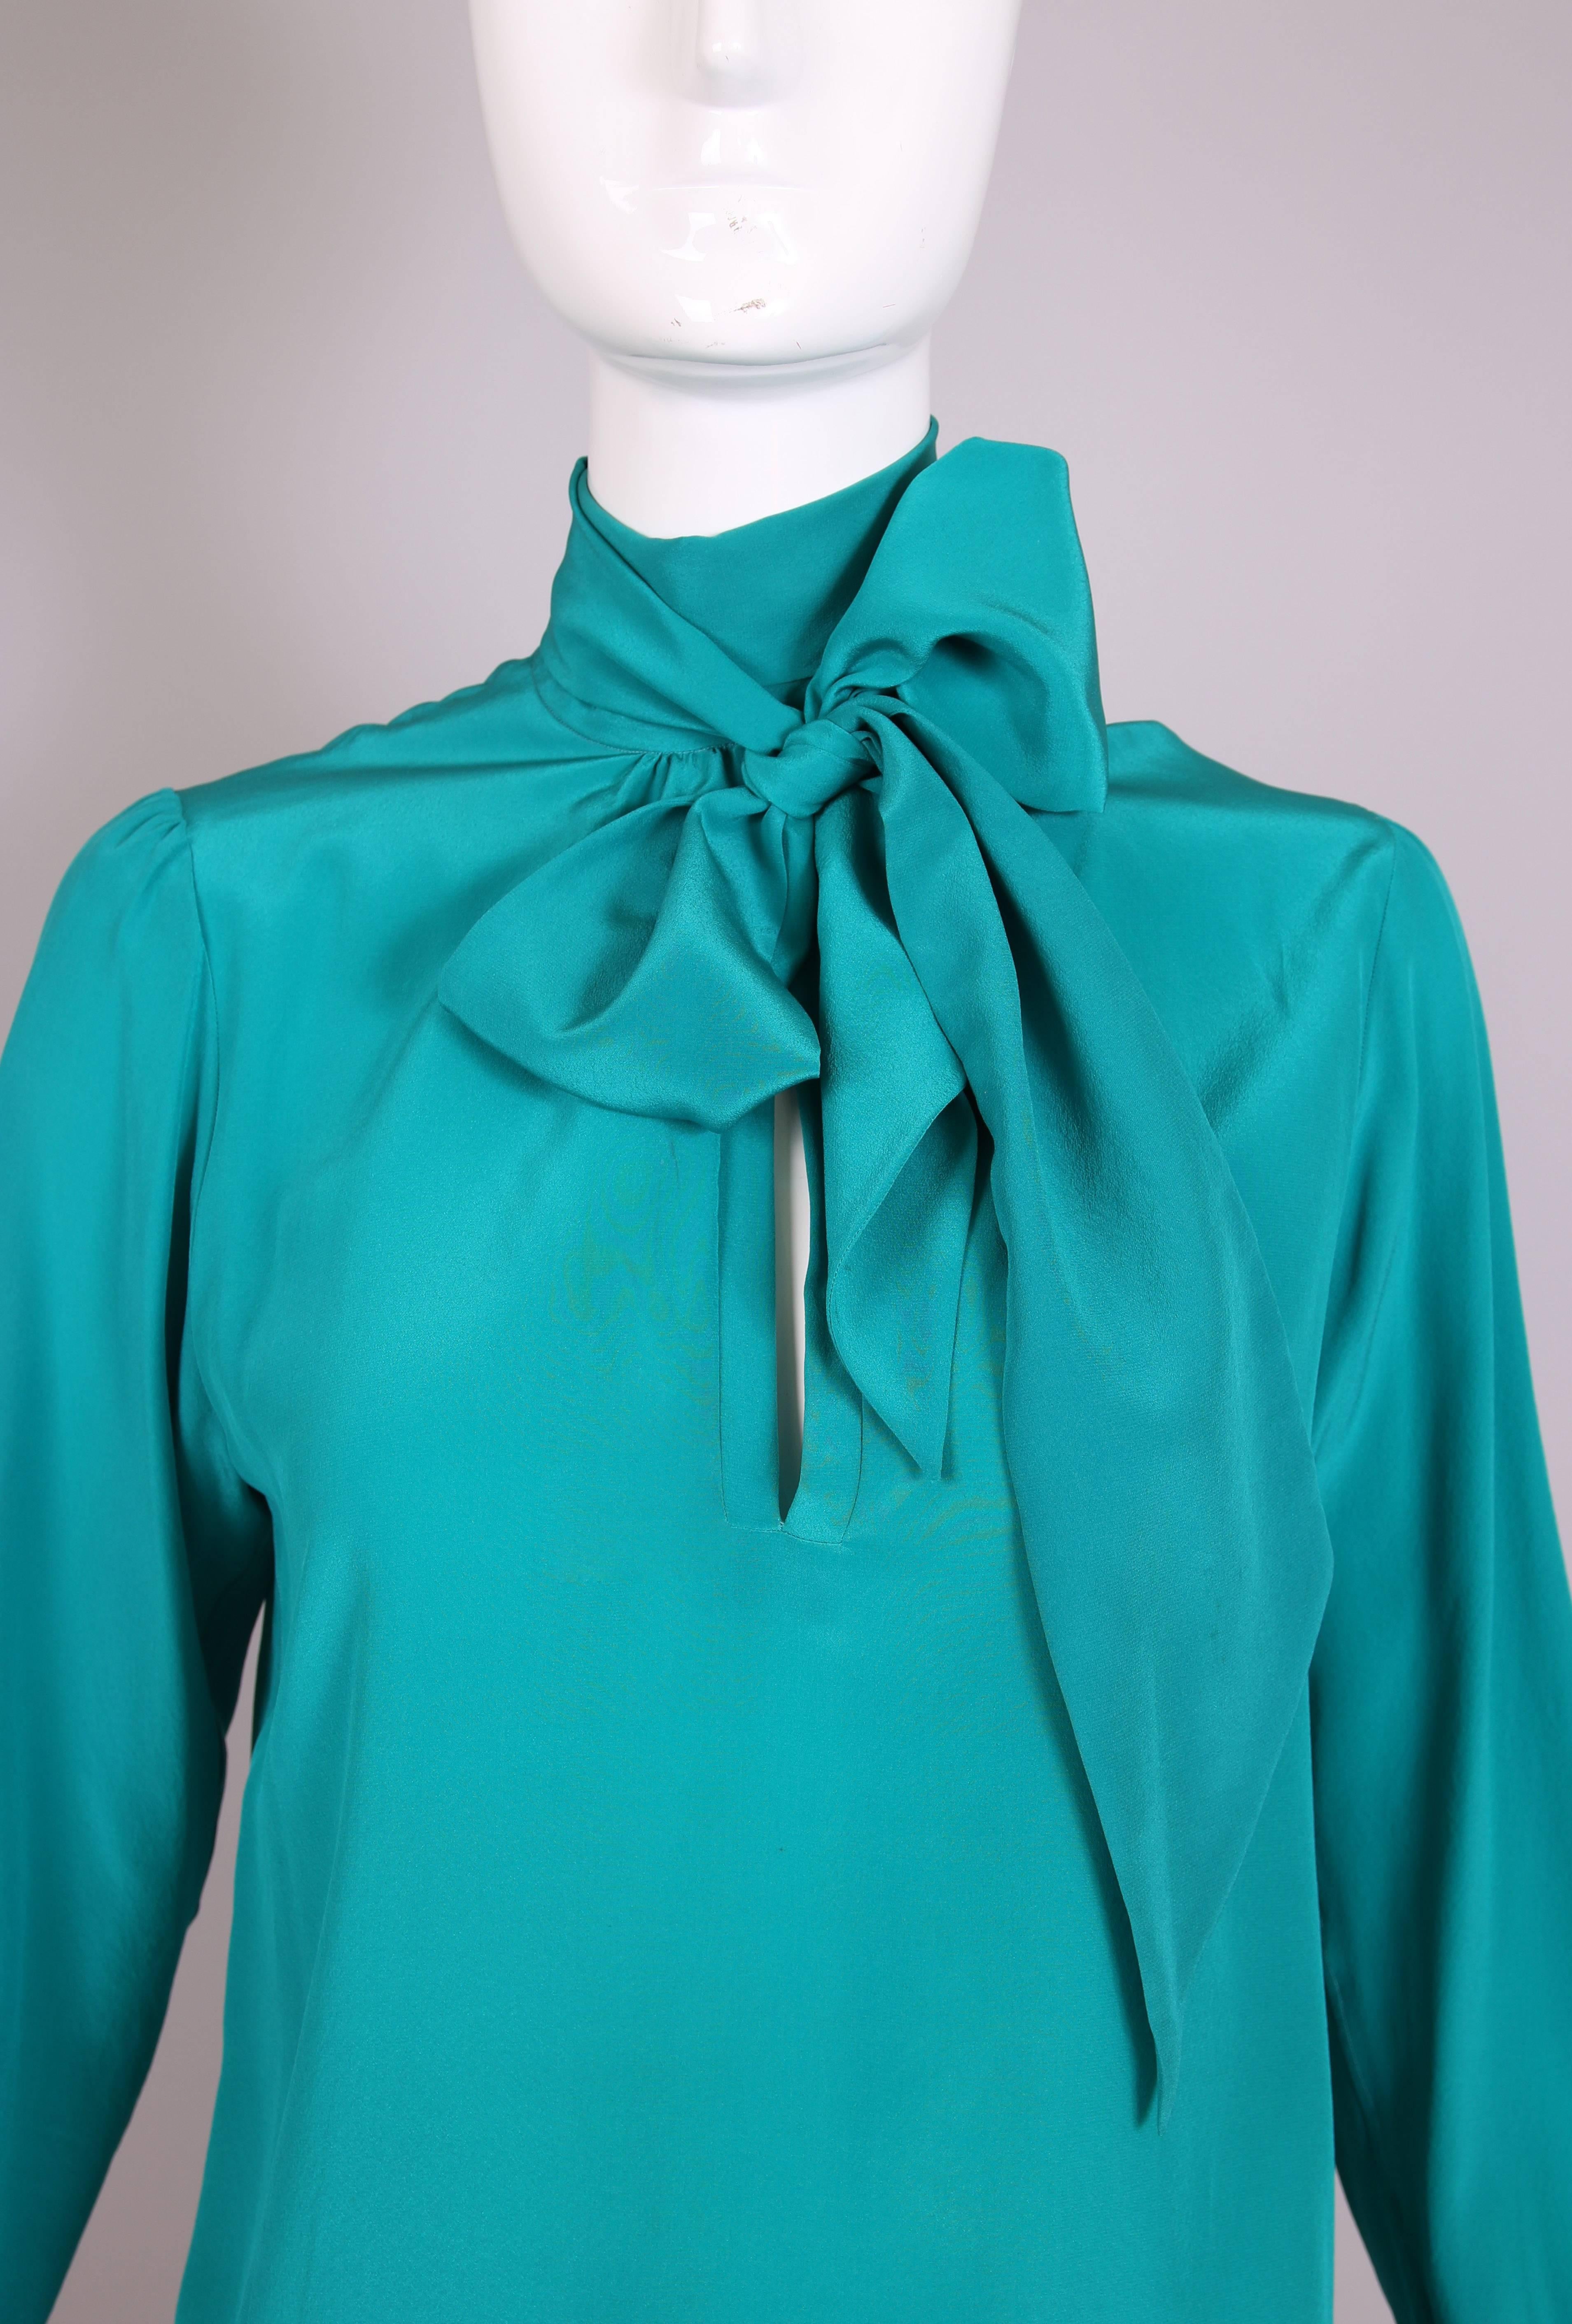 Vintage Yves Saint Laurent Blue Green Silk Blouse w/Pussy Bow at Neck 1